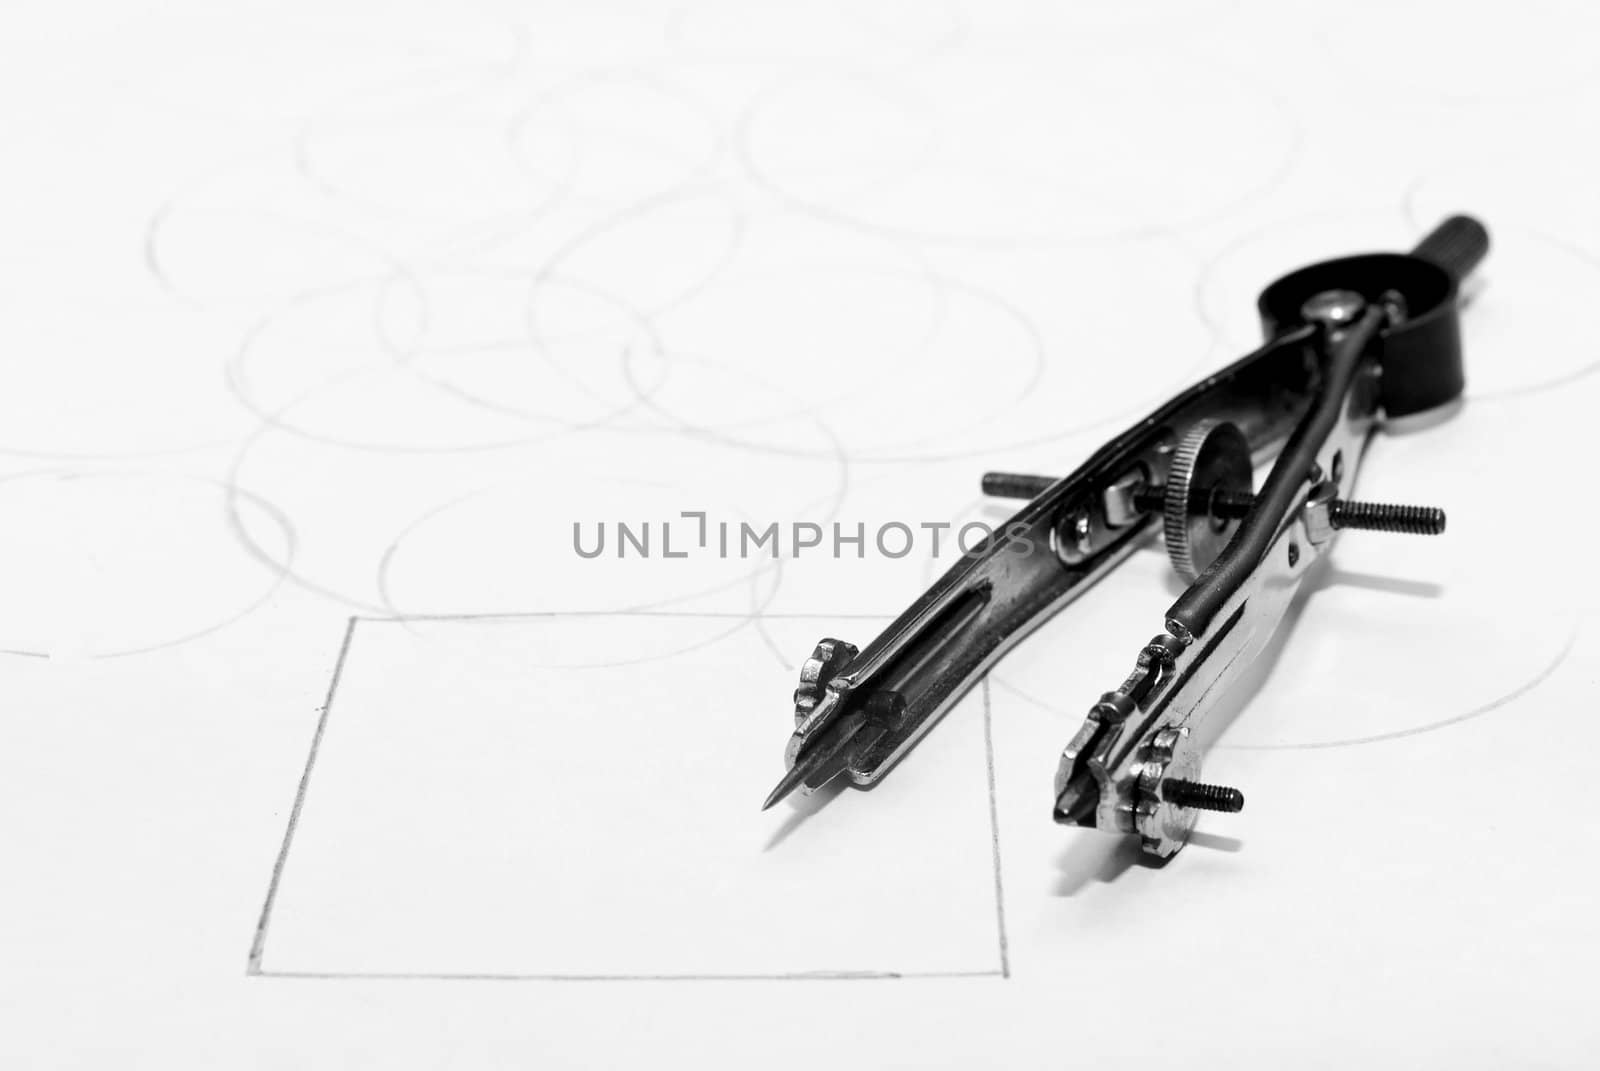 Drawing compass by Diversphoto